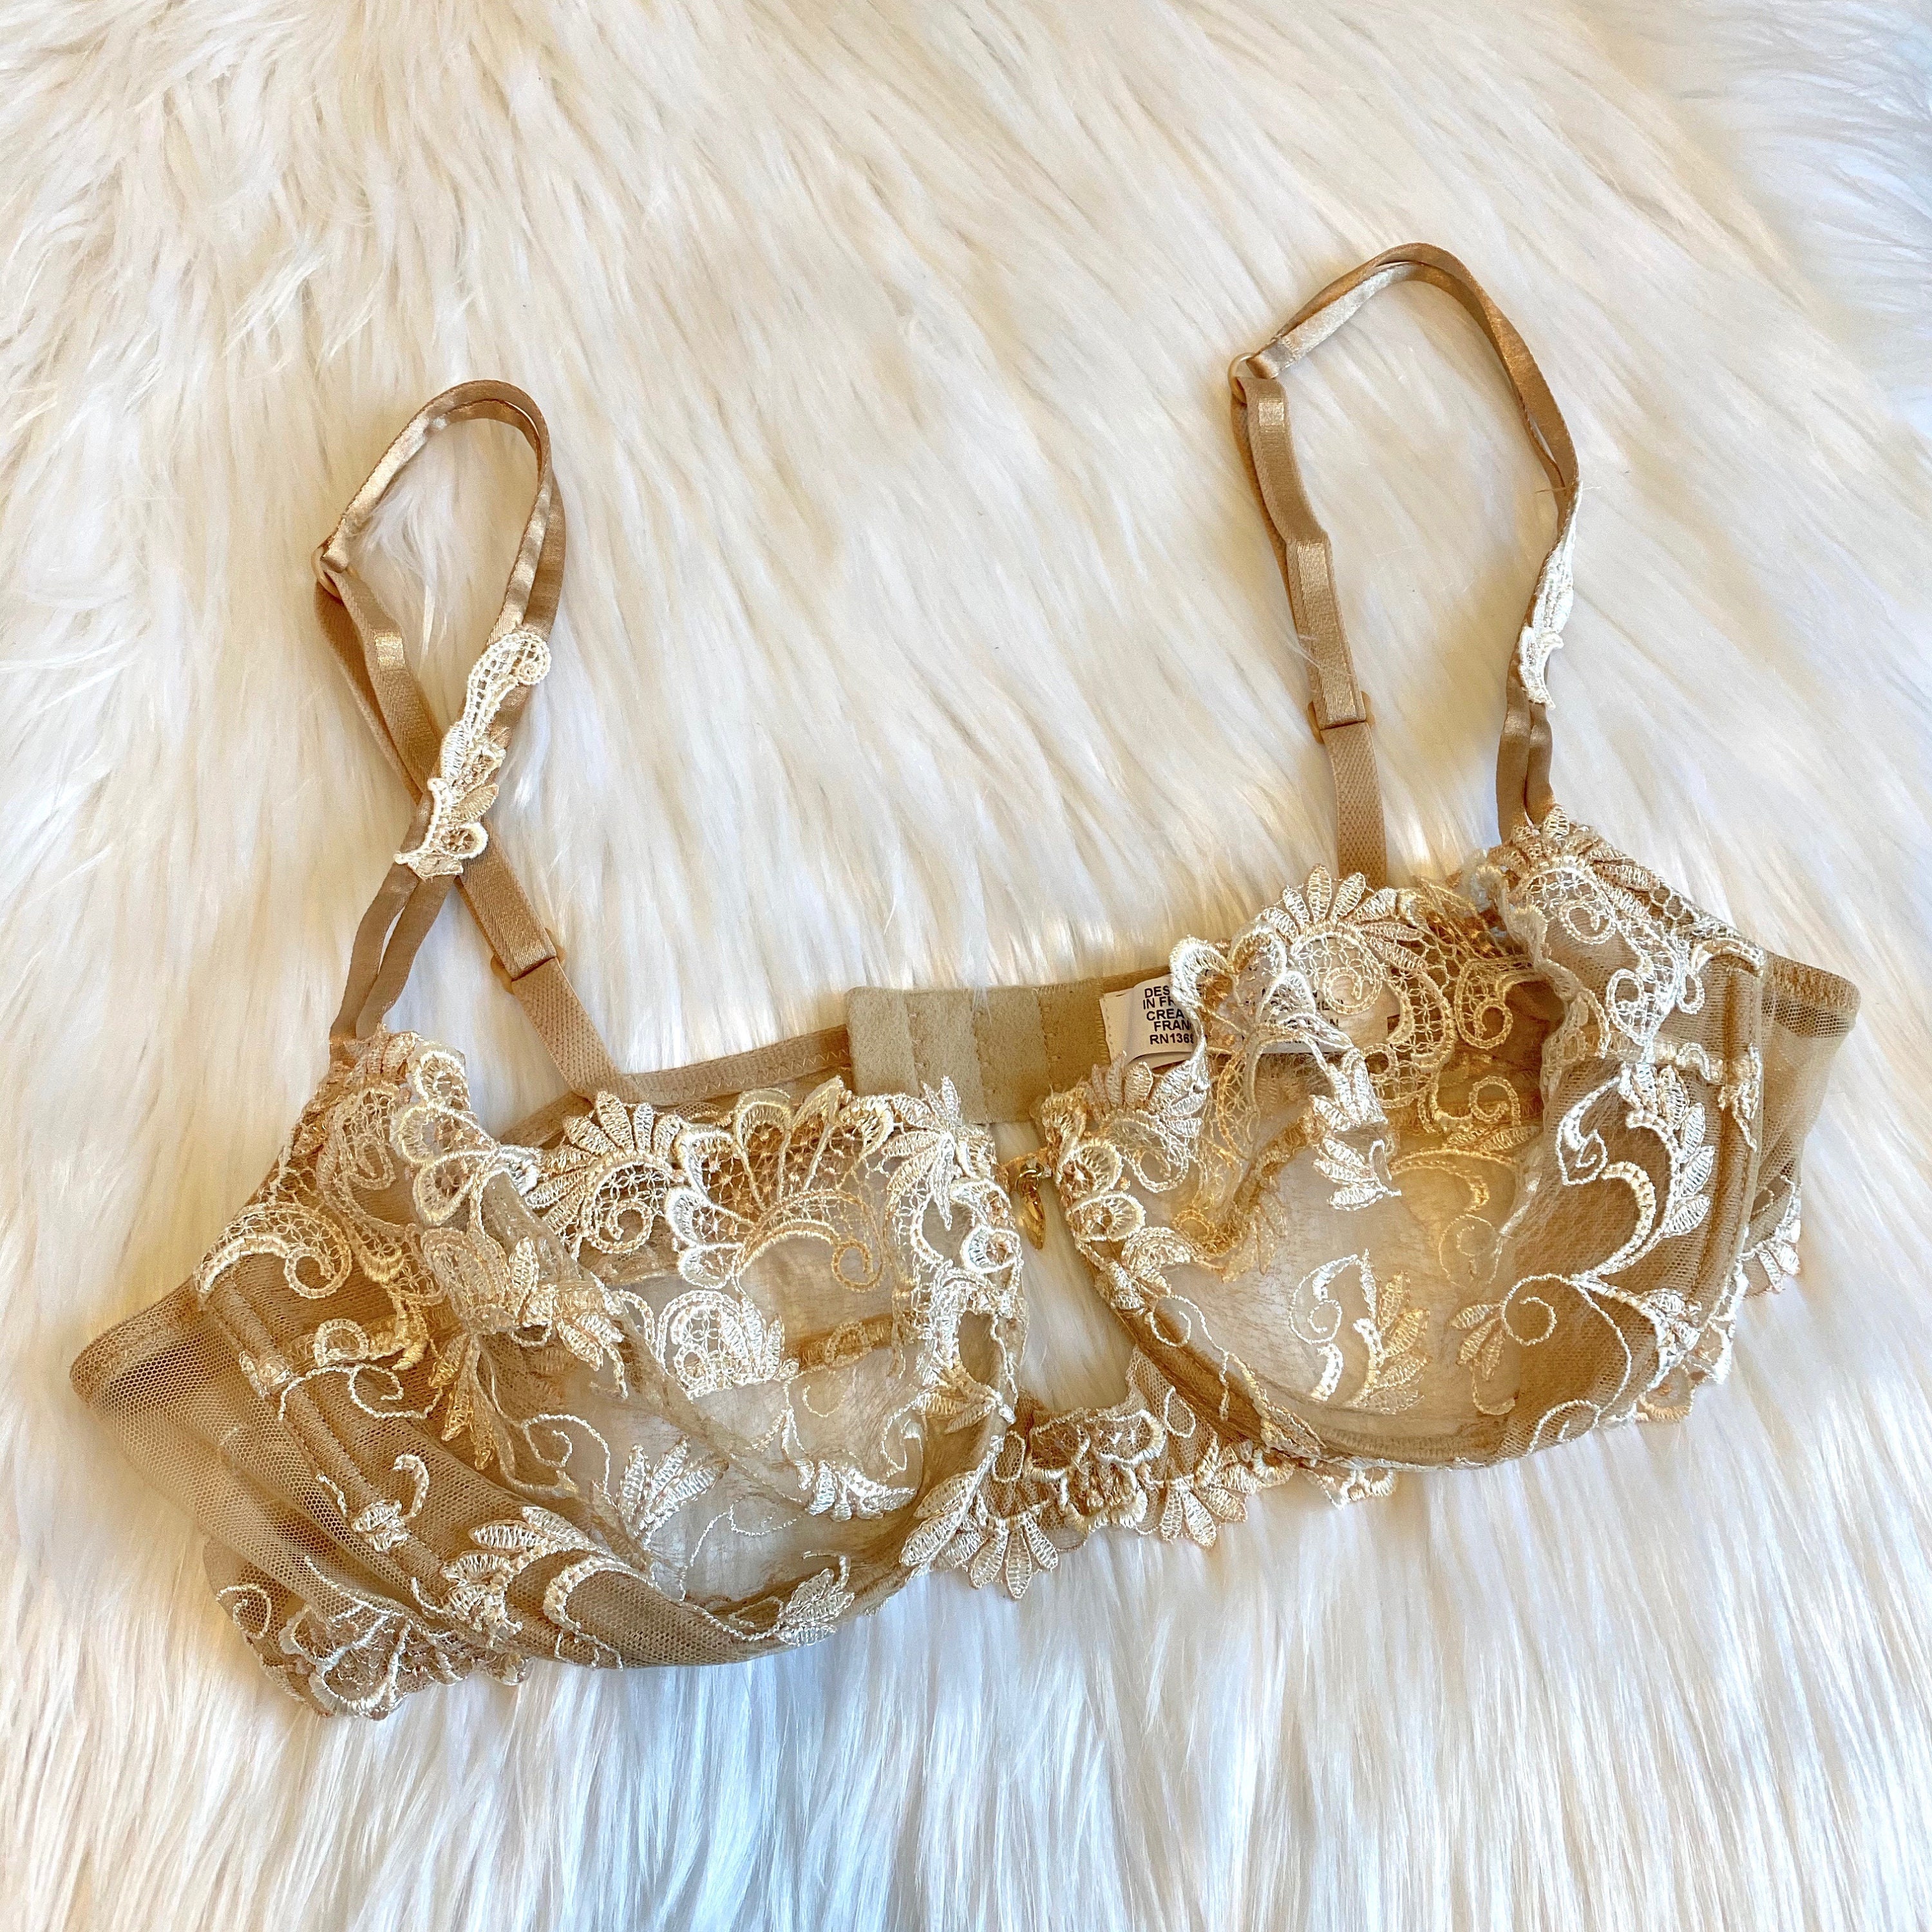 Vintage Lise Charmel Nude Lace Bra, French Made and Designed